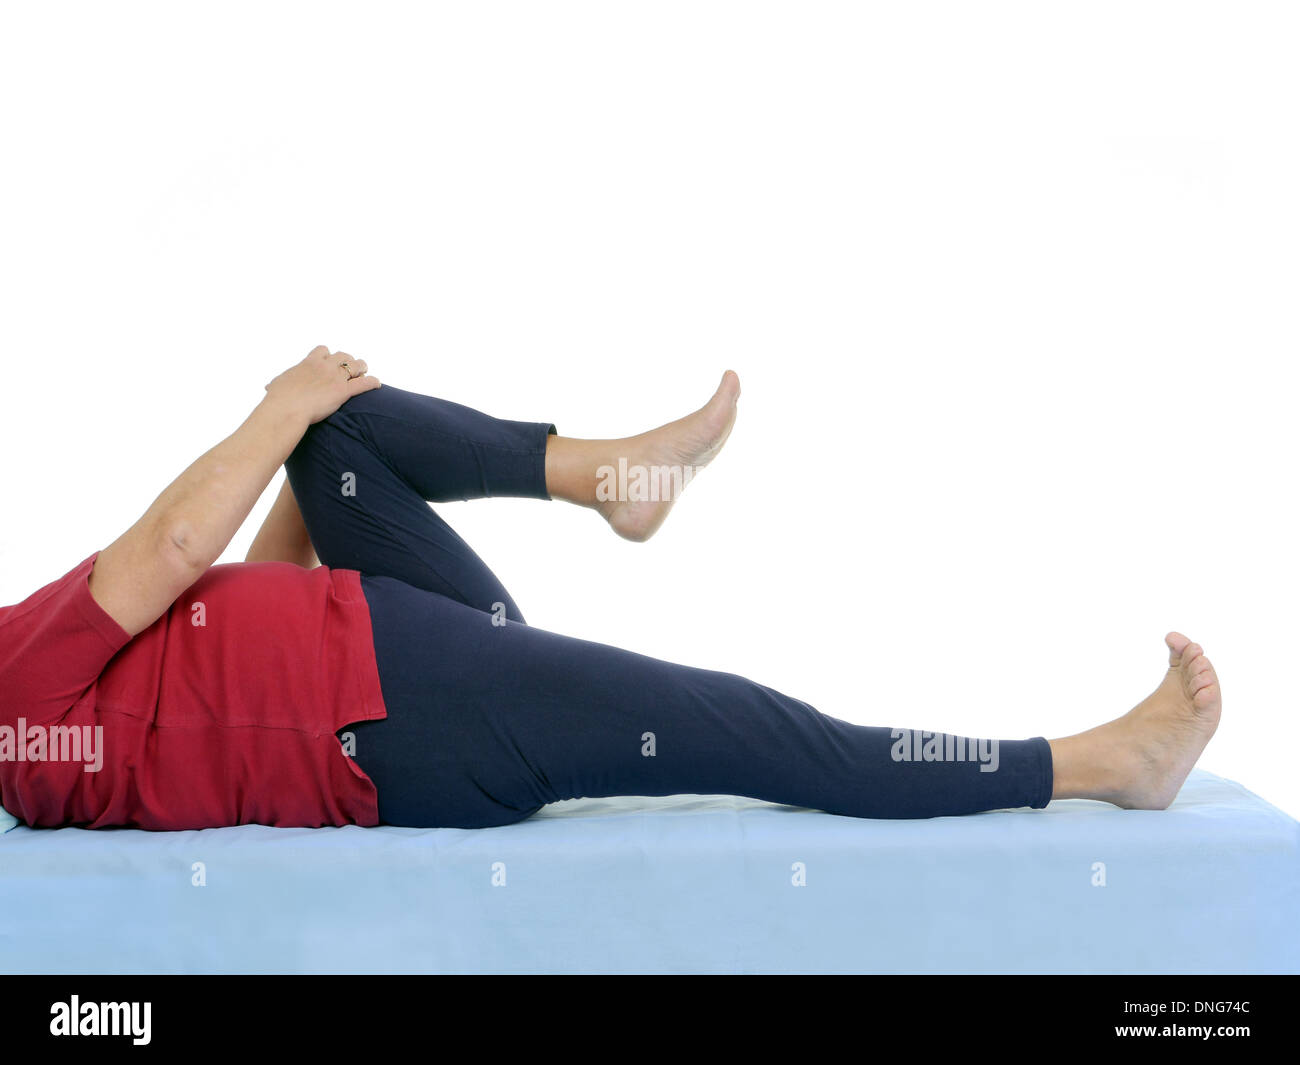 Older patient performing functional test of hip joint contraction lying on bed Stock Photo